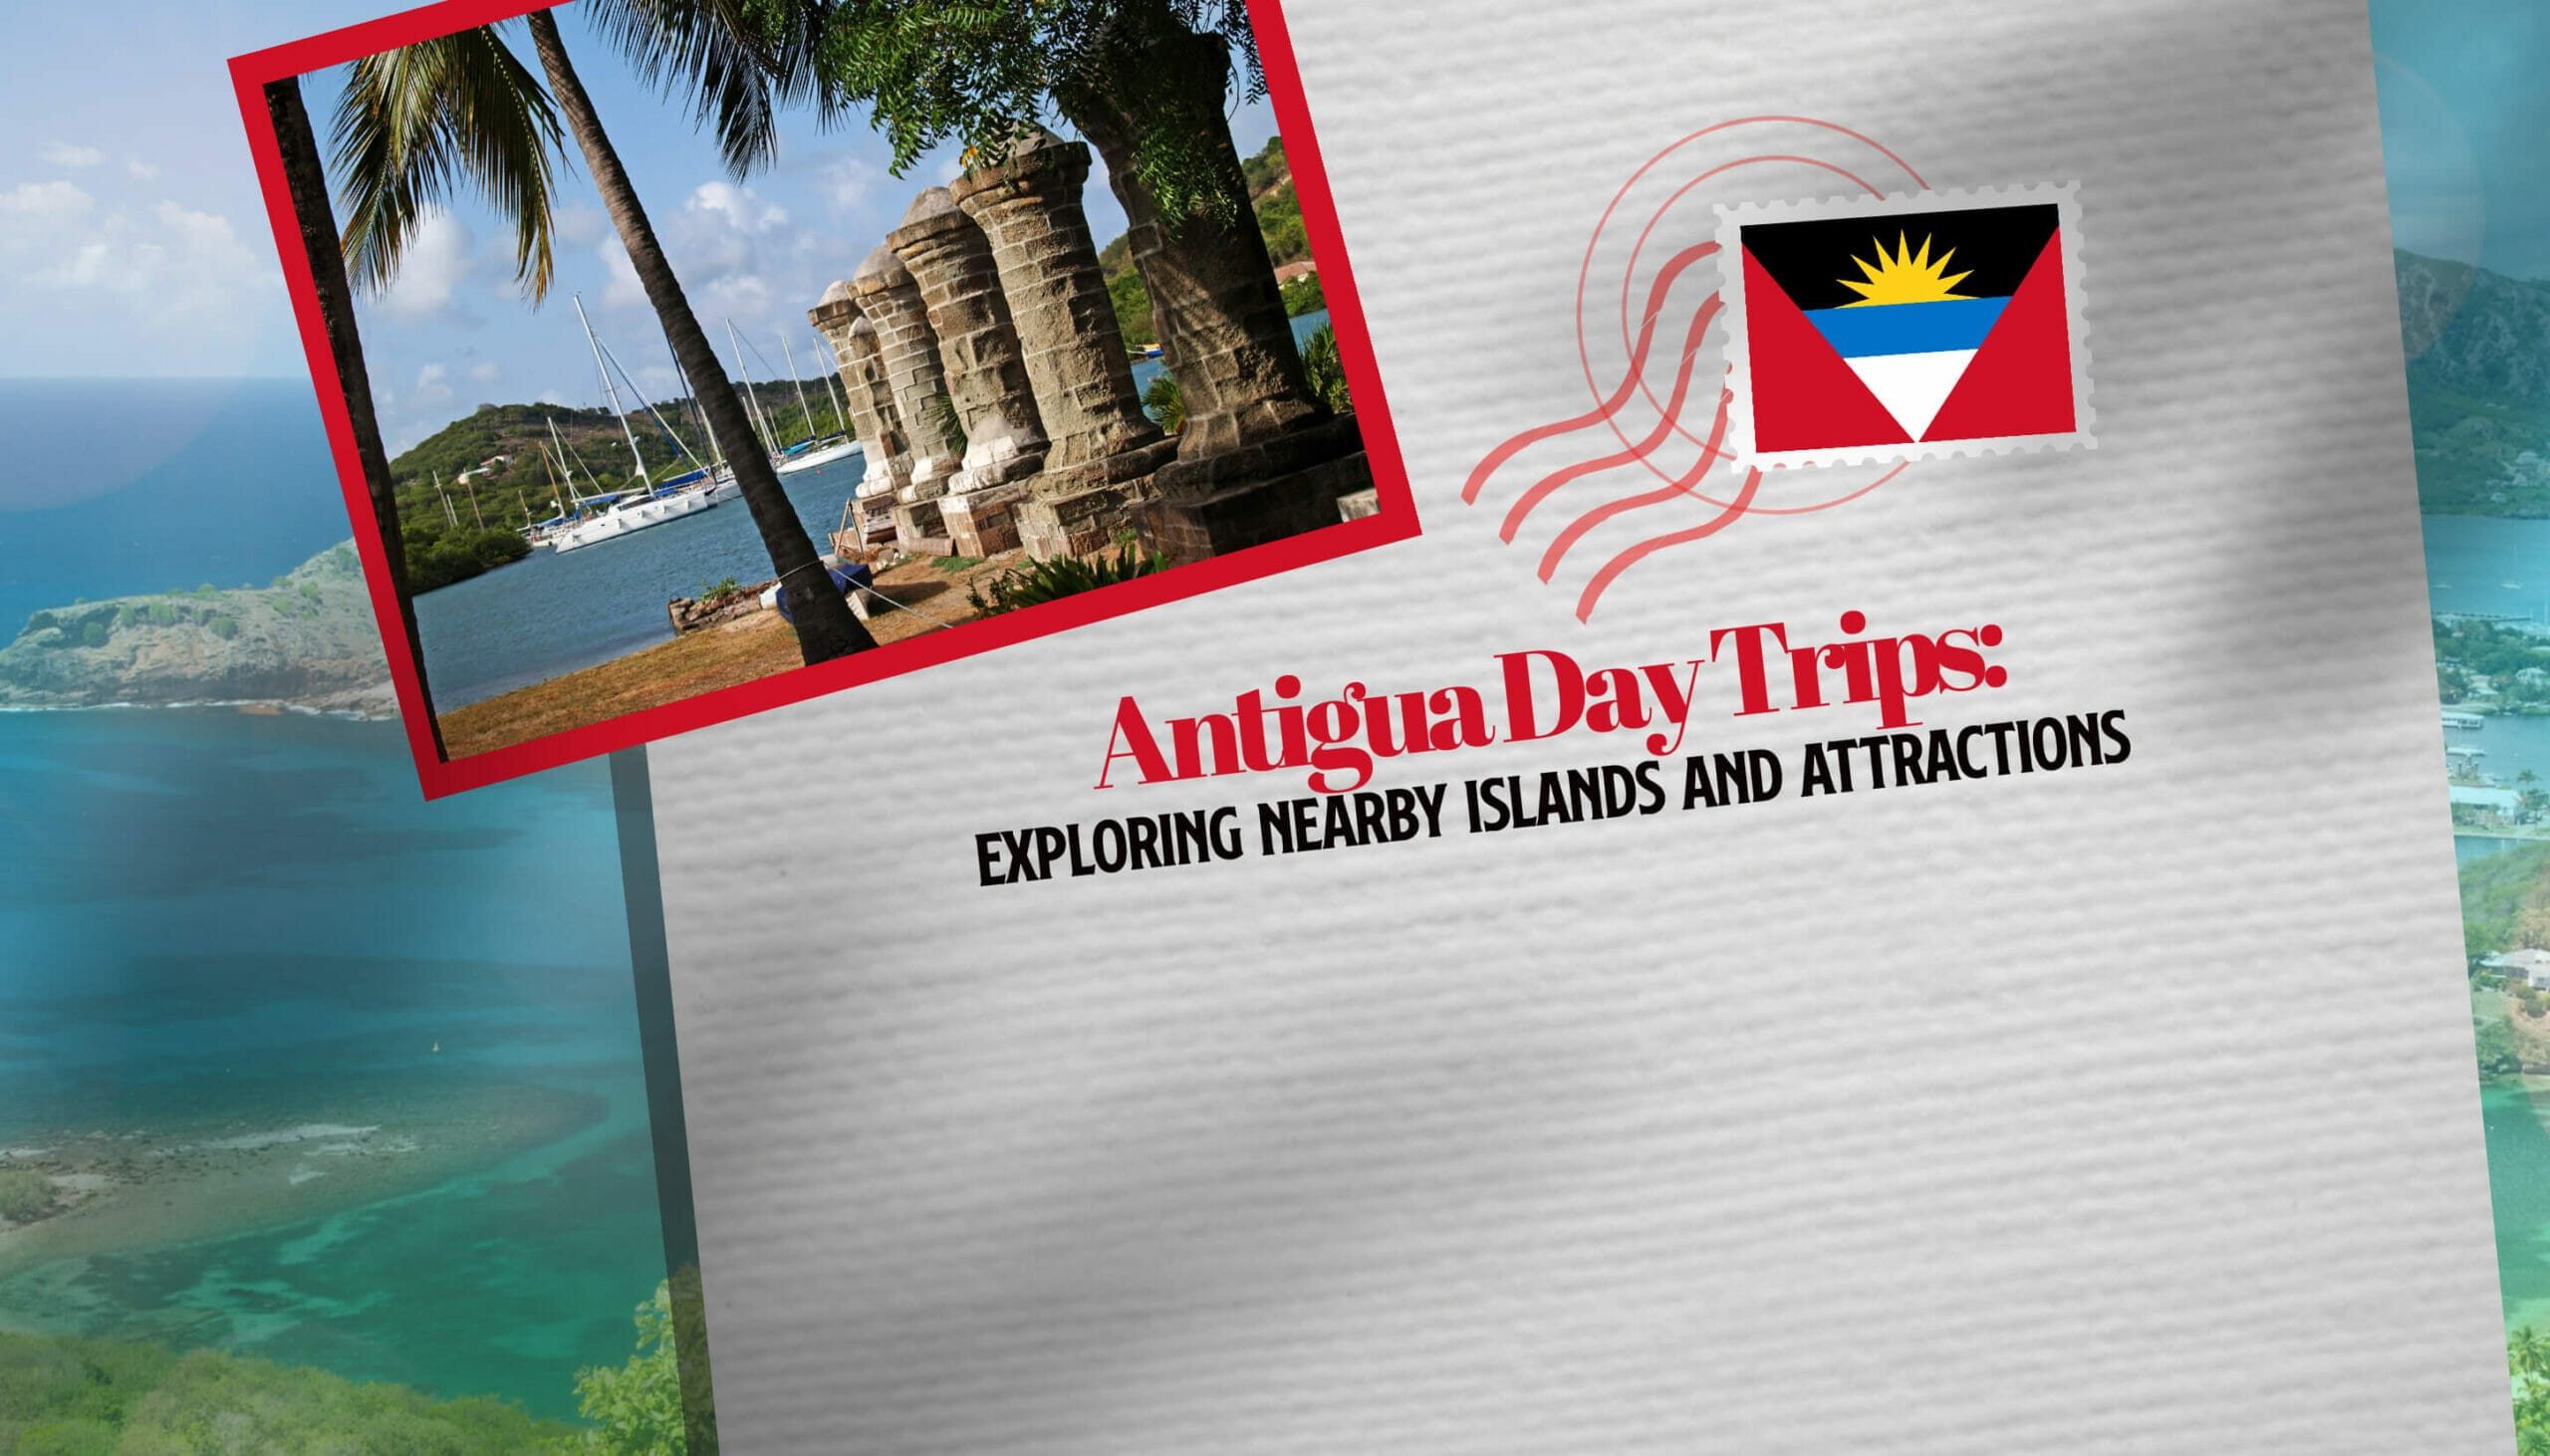 Antigua Day Trips Exploring Nearby Islands and Attractions